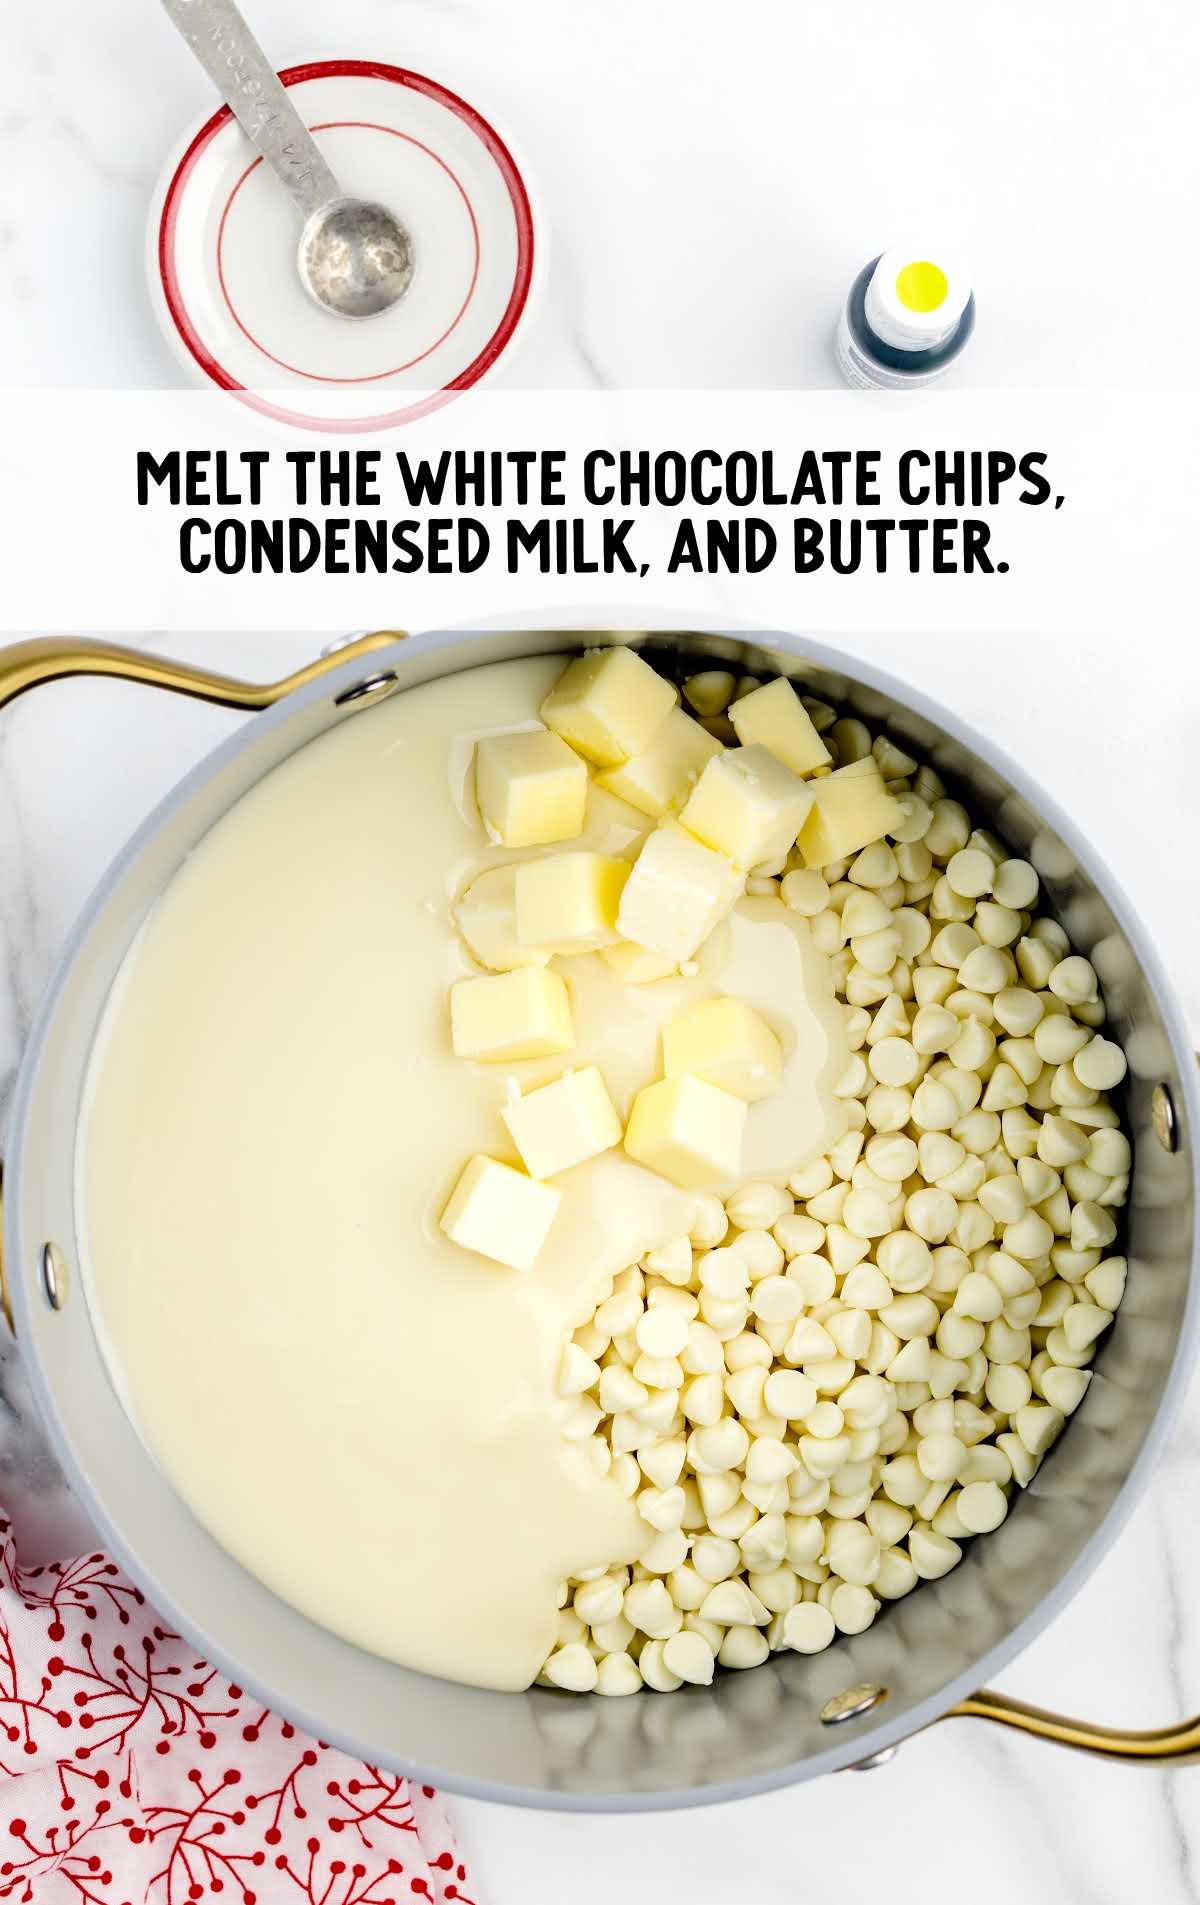 white chocolate chips, condensed milk, and butter melted